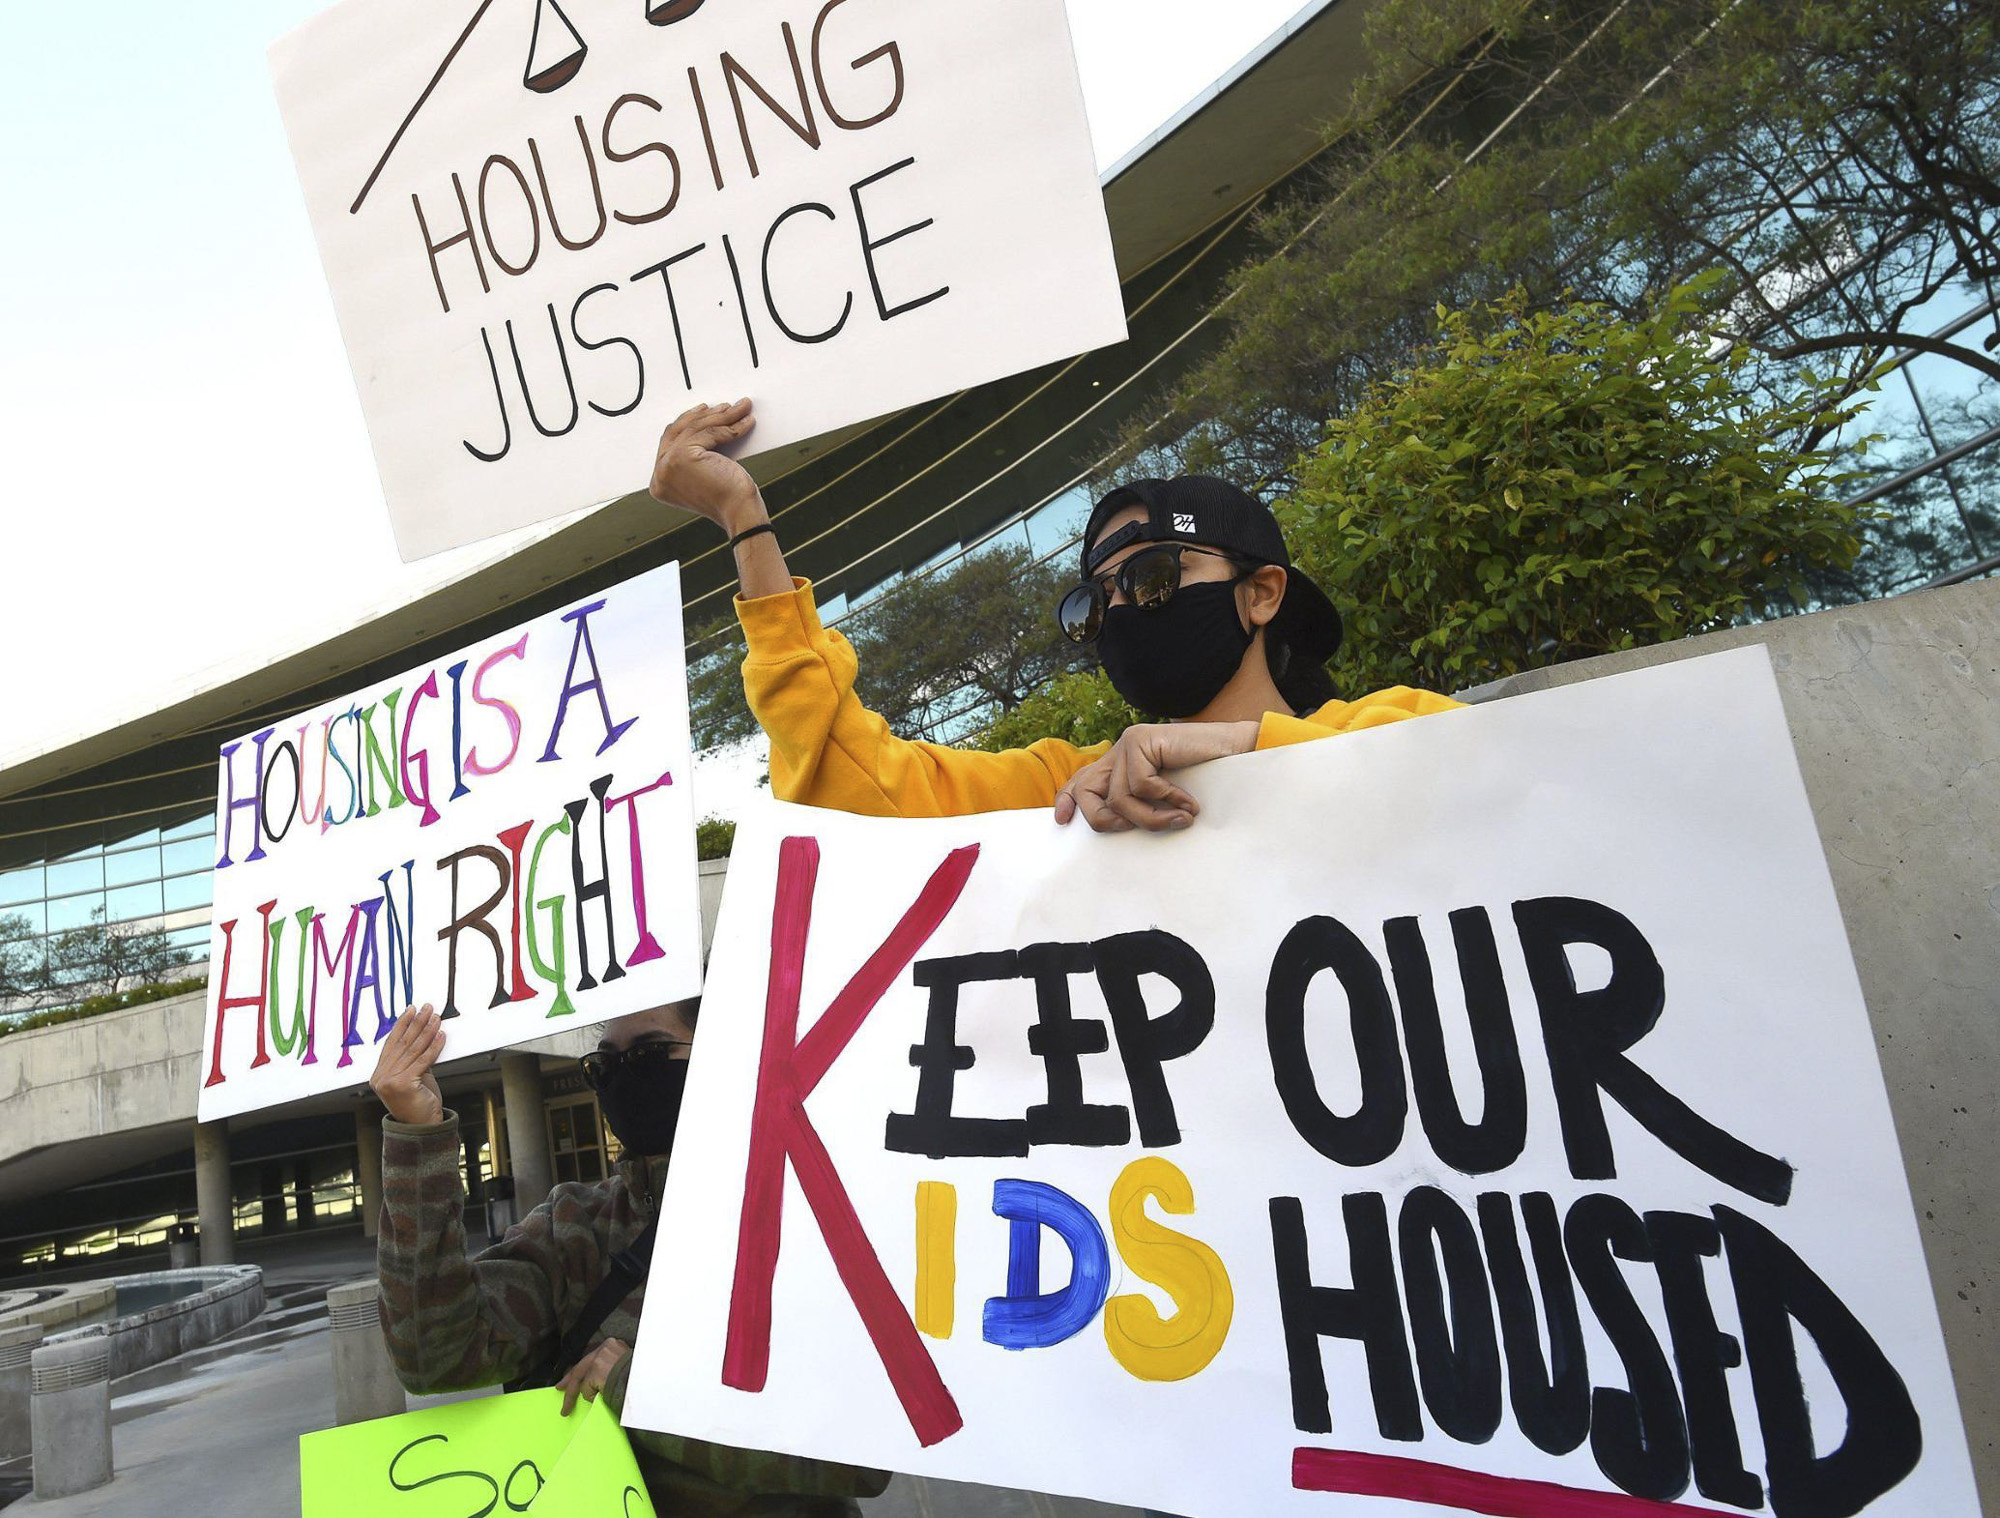 Workers’ centre seeks to strengthen tenant protection and suspend evictions in Miami